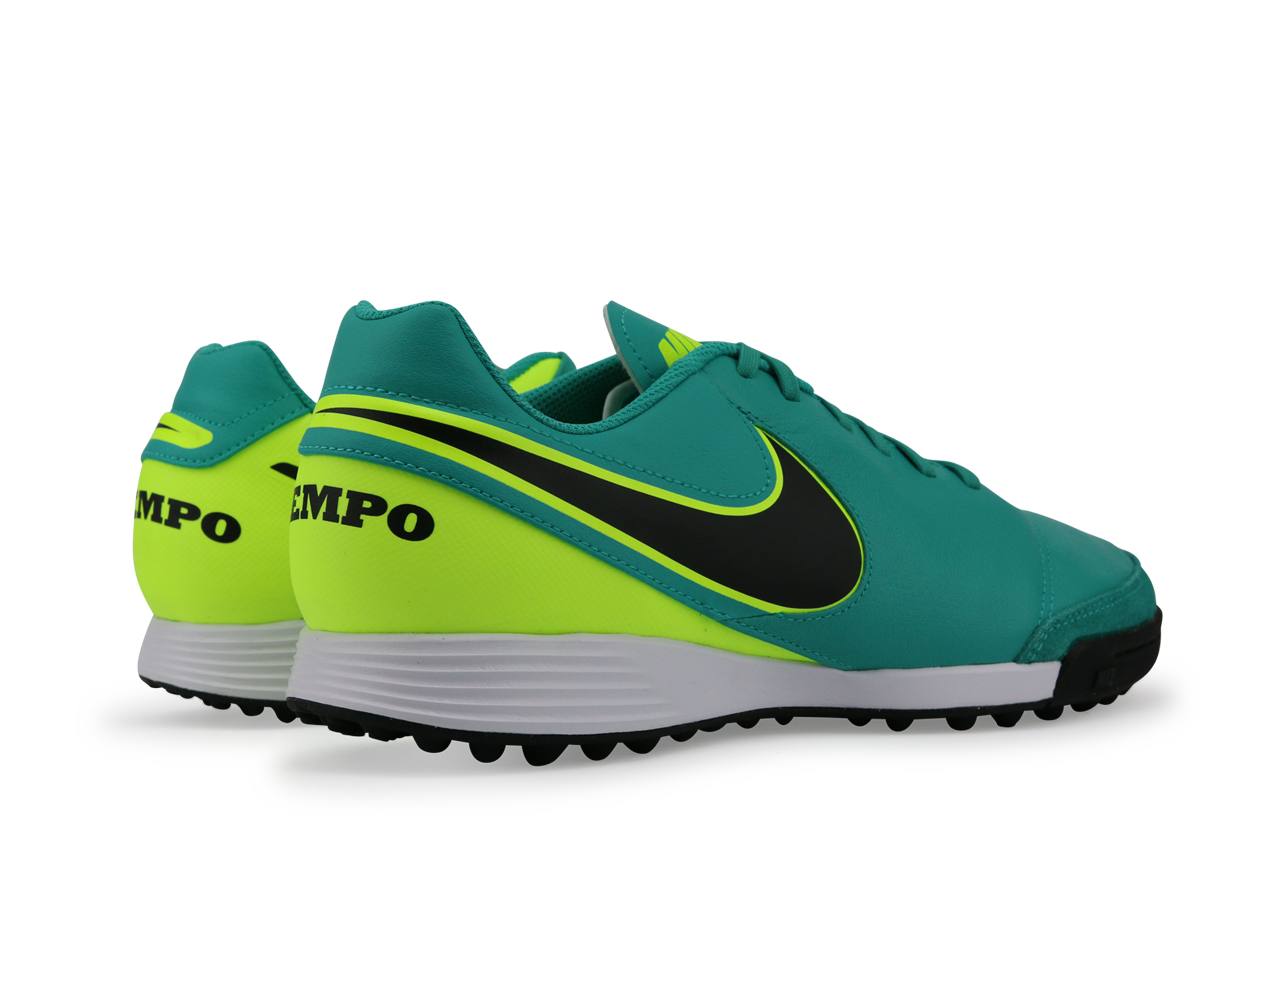 Nike Men's Tiempo Genio Leather Turf Soccer Shoes Clear Jade/Black/Volt